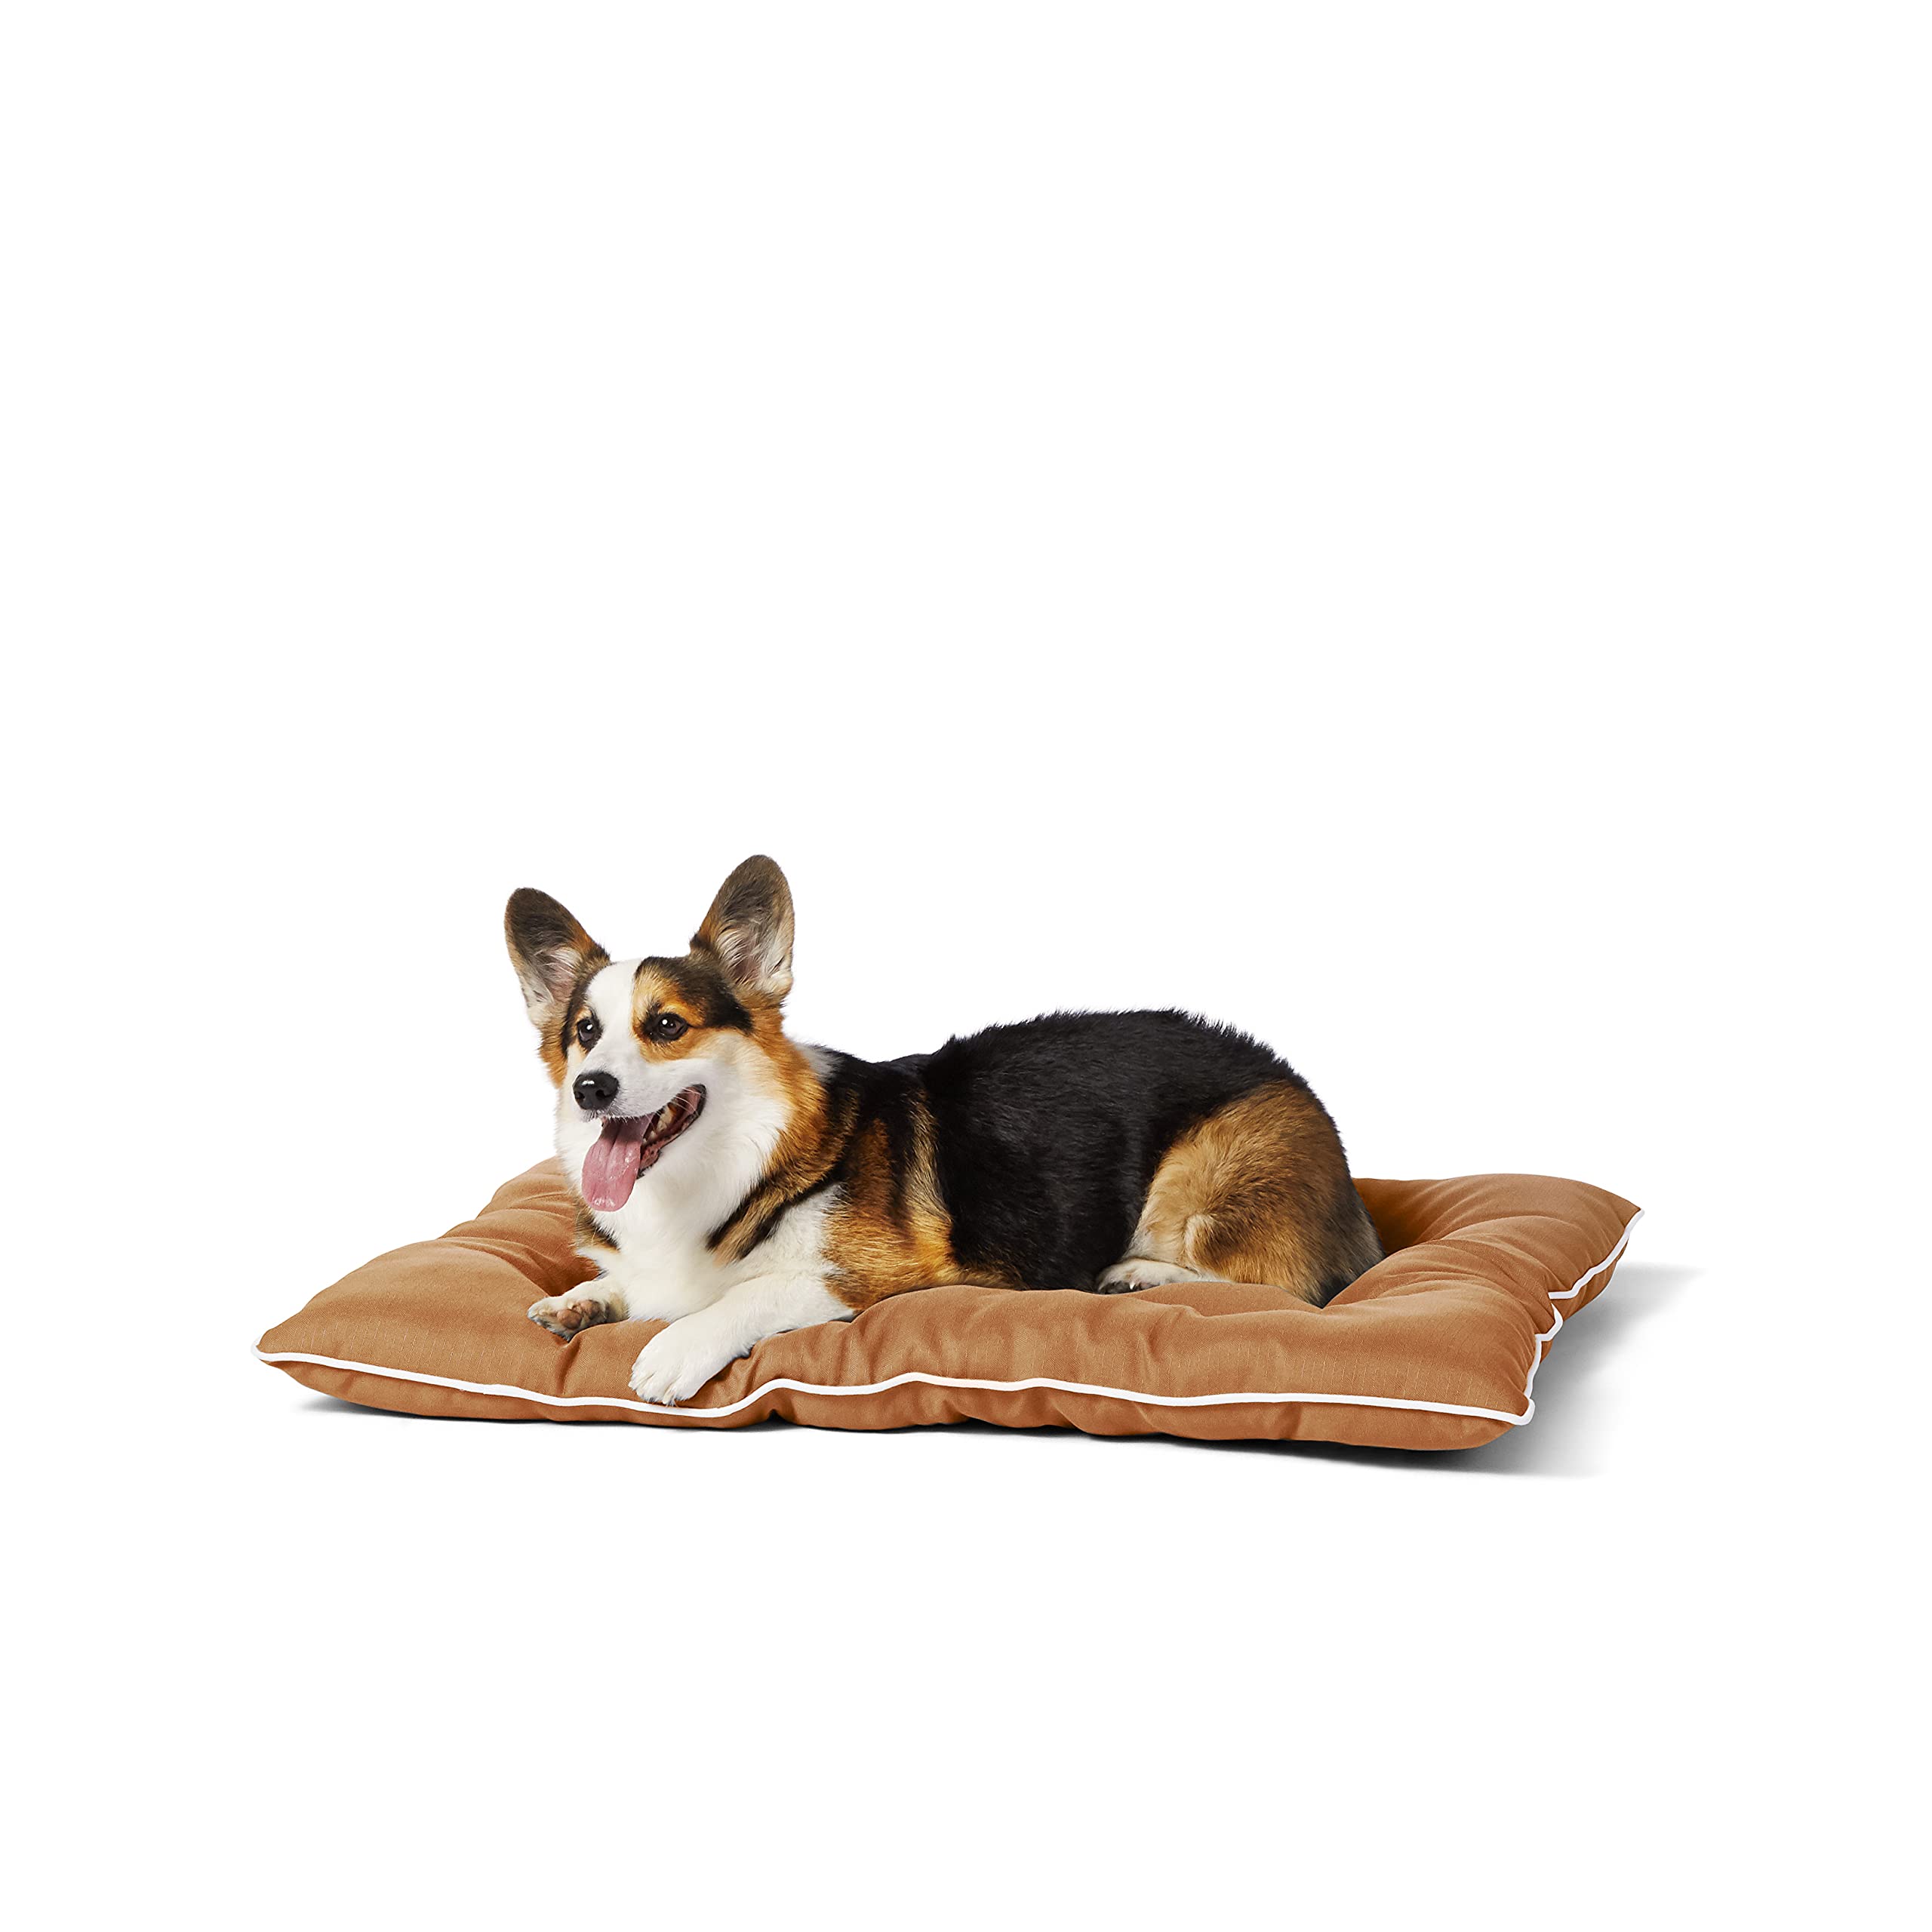 Amazon Basics Outdoor Water Repellent Pet Pillow Bed (Medium) $10.29 shipped w/ Prime